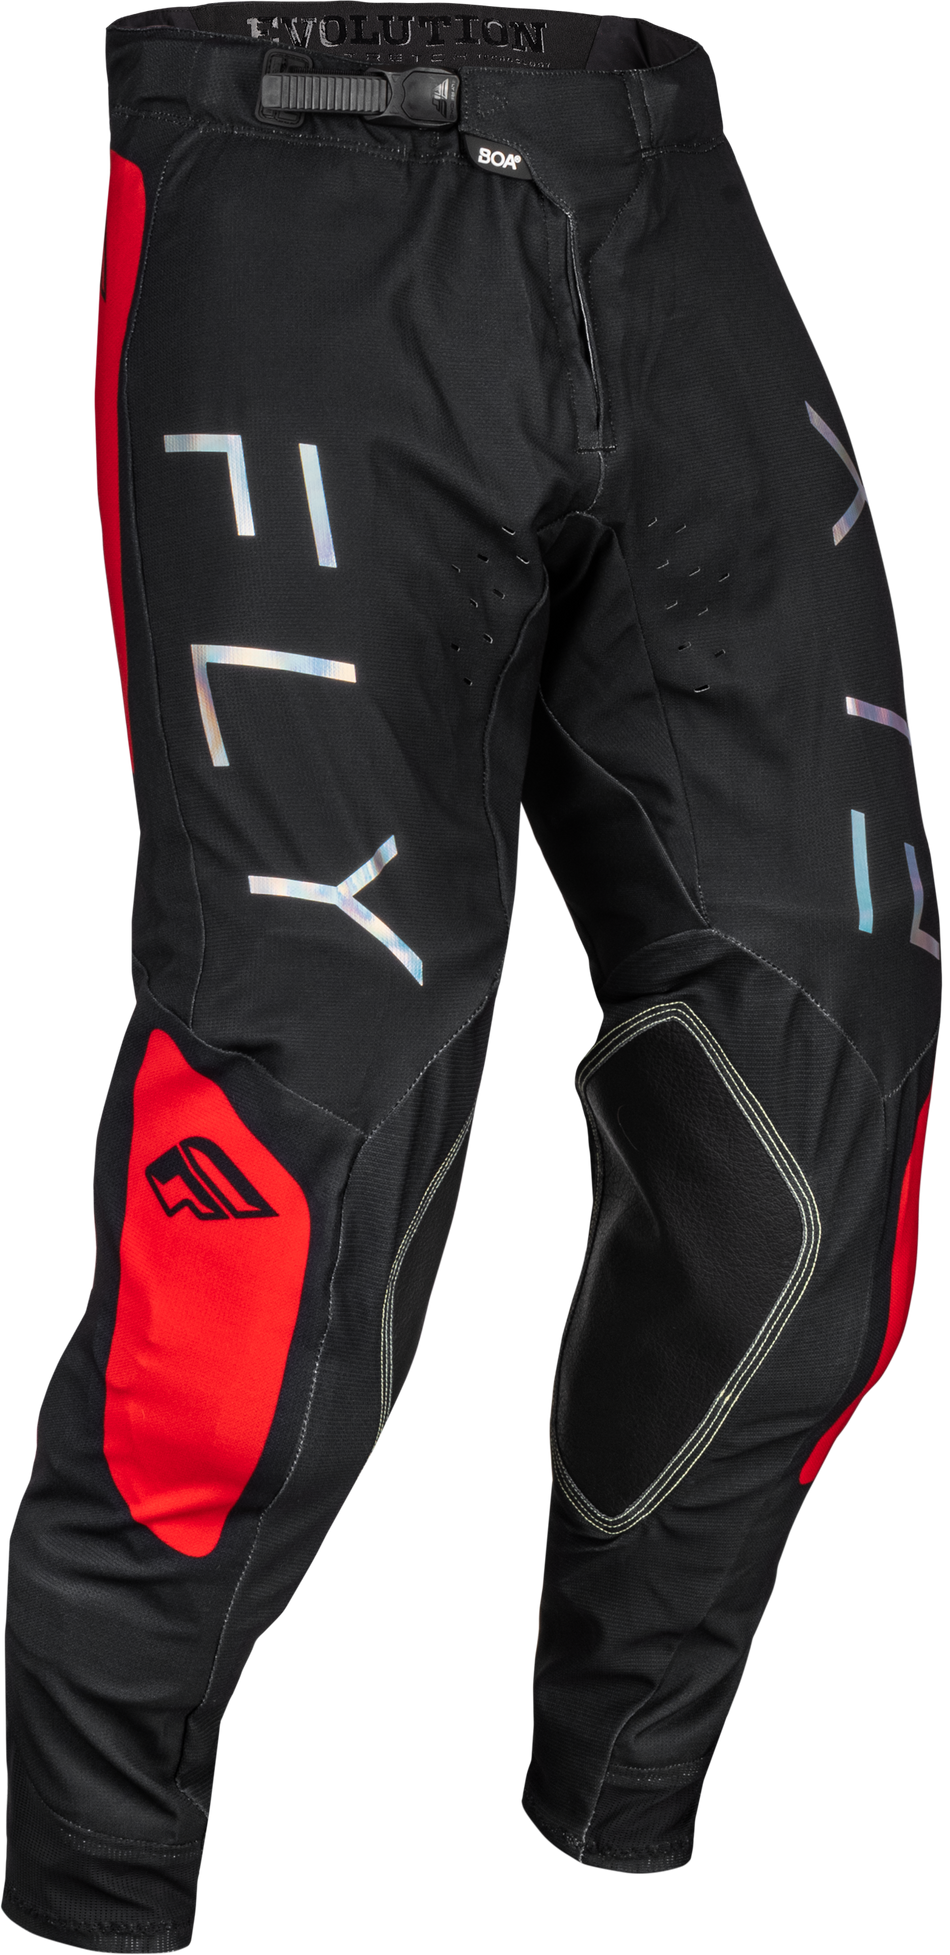 FLY RACING Evolution Dst Pants Black/Red Sz 38 377-13038